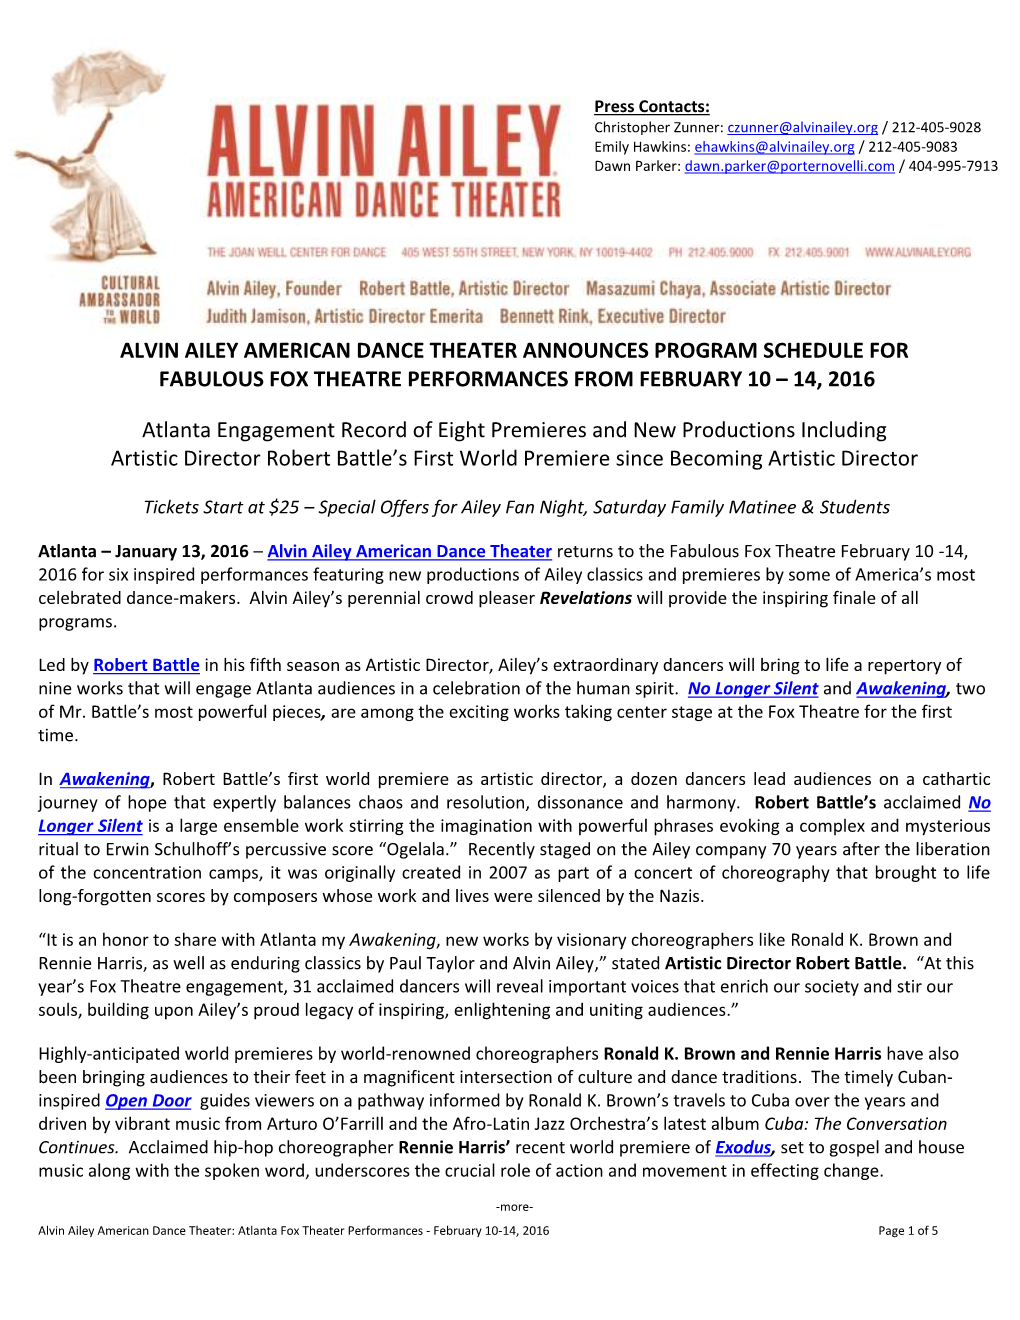 Alvin Ailey American Dance Theater Announces Program Schedule for Fabulous Fox Theatre Performances from February 10 – 14, 2016